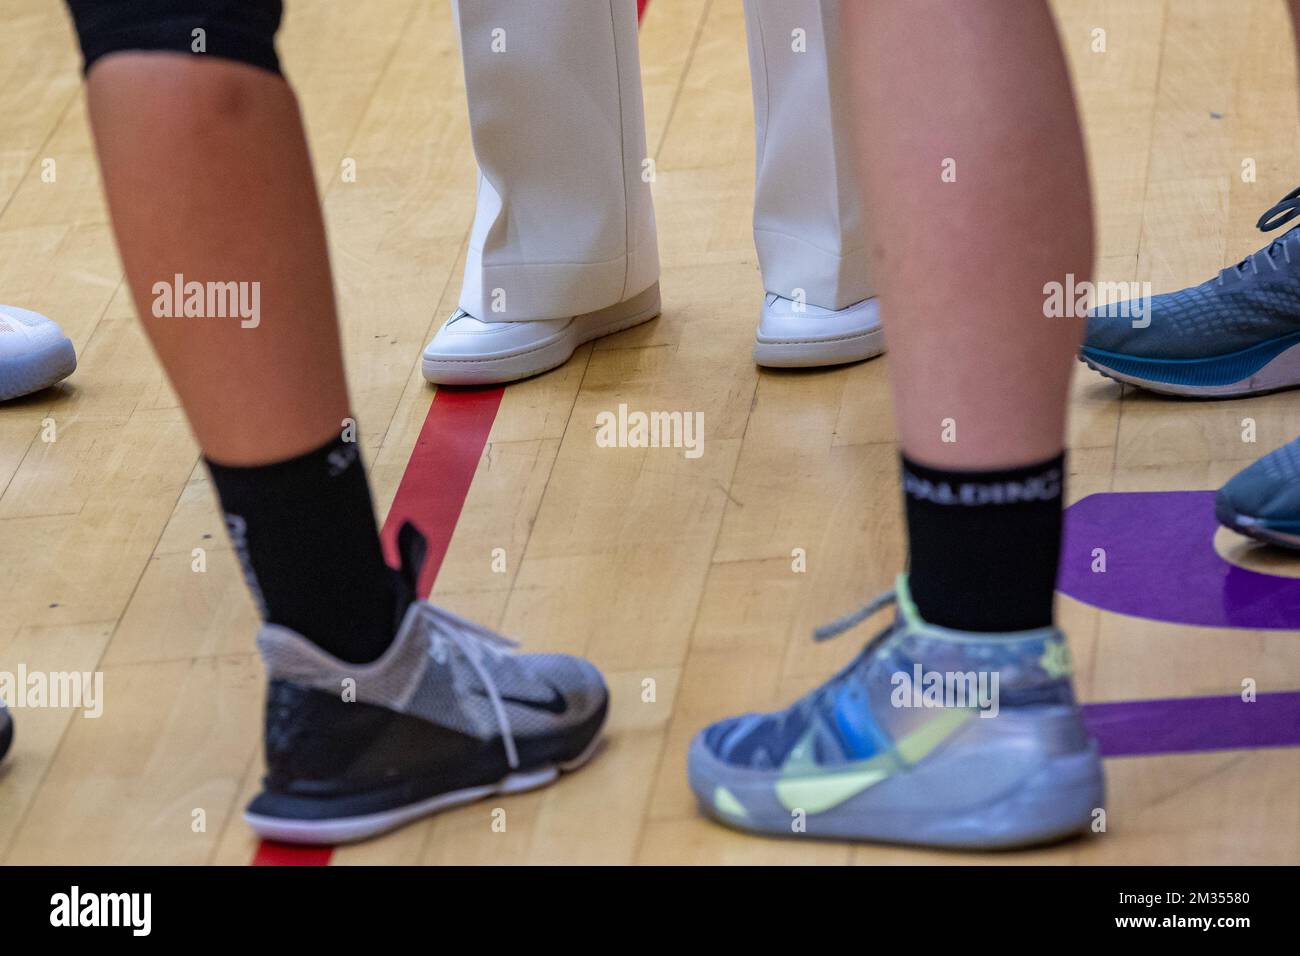 Illustration picture shows the shoes of Queen Mathilde of Belgium pictured  during a royal visit to the Belgian Cats, the Belgian national women's  basketball team, in Kortrijk, Tuesday 08 June 2021. The